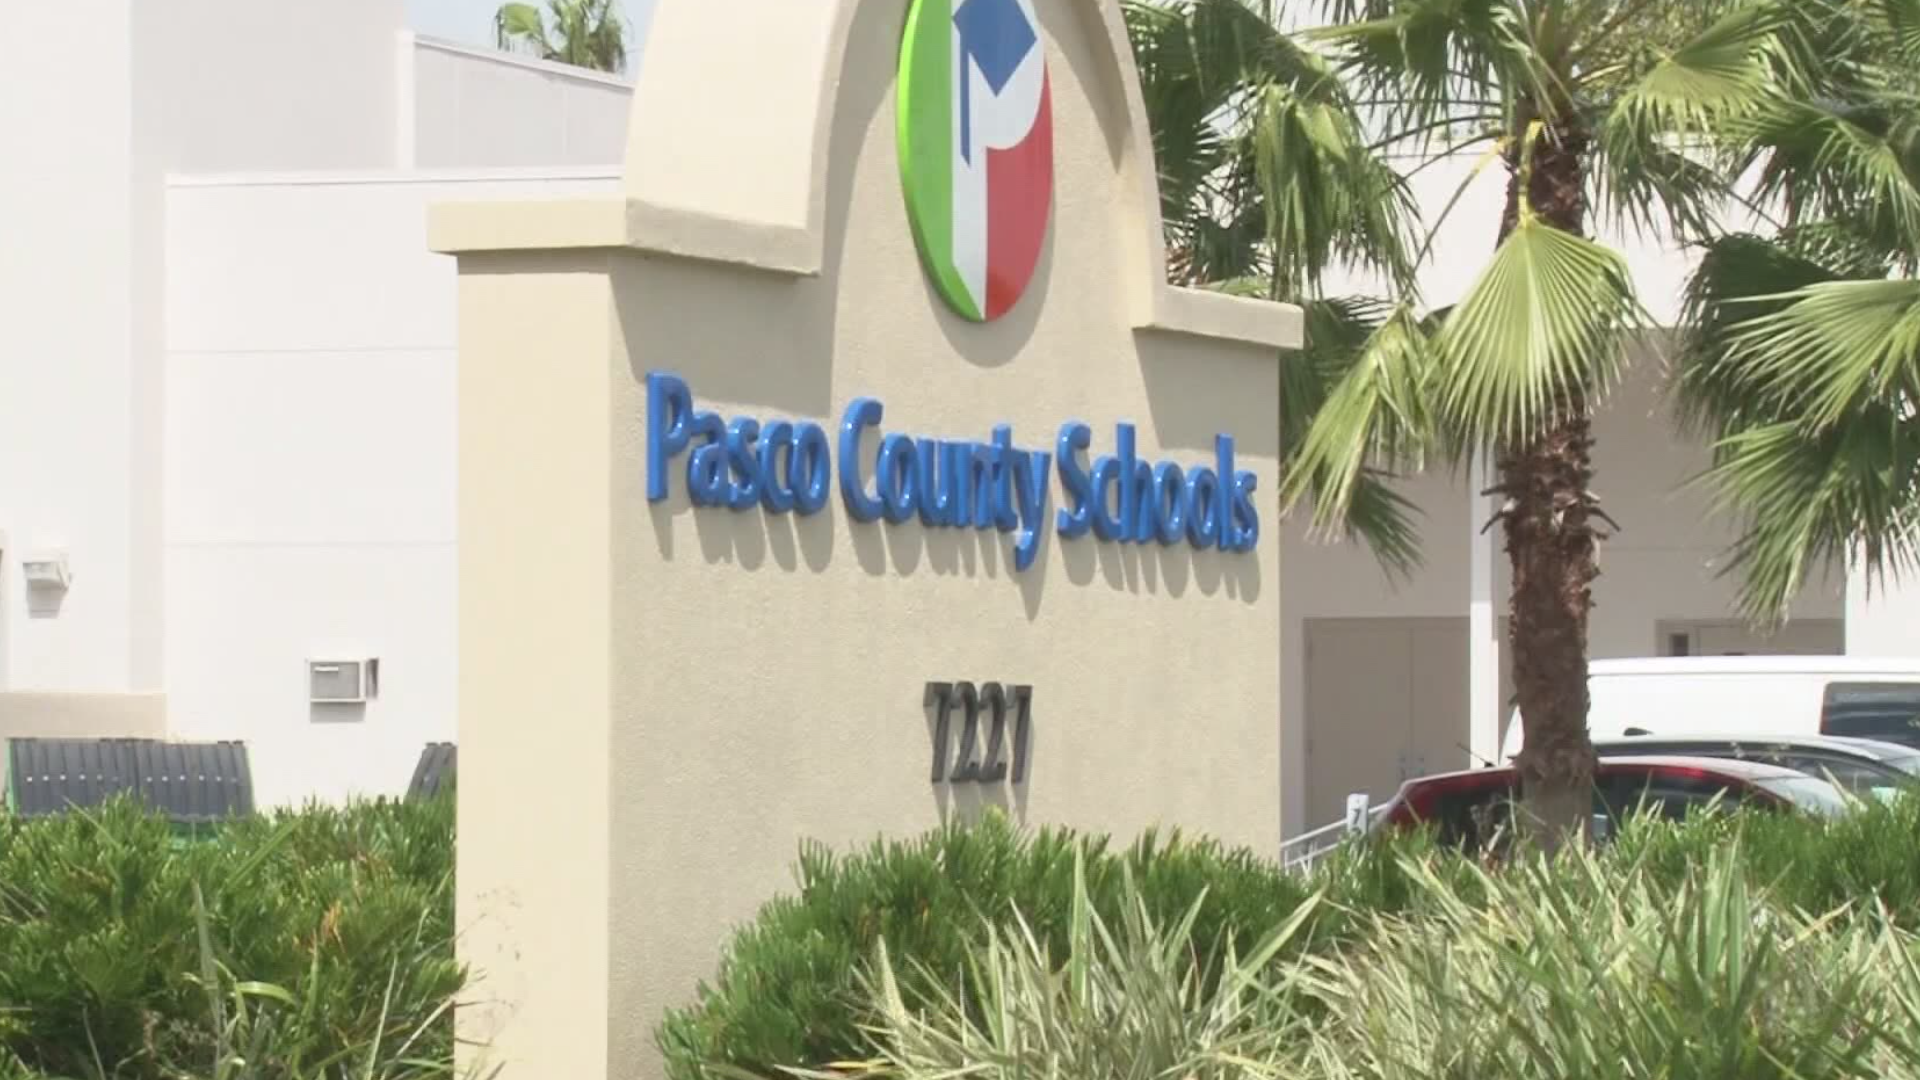 The U.S. Department of Education has opened an investigation into Pasco County Schools sharing information with the sheriff's office.